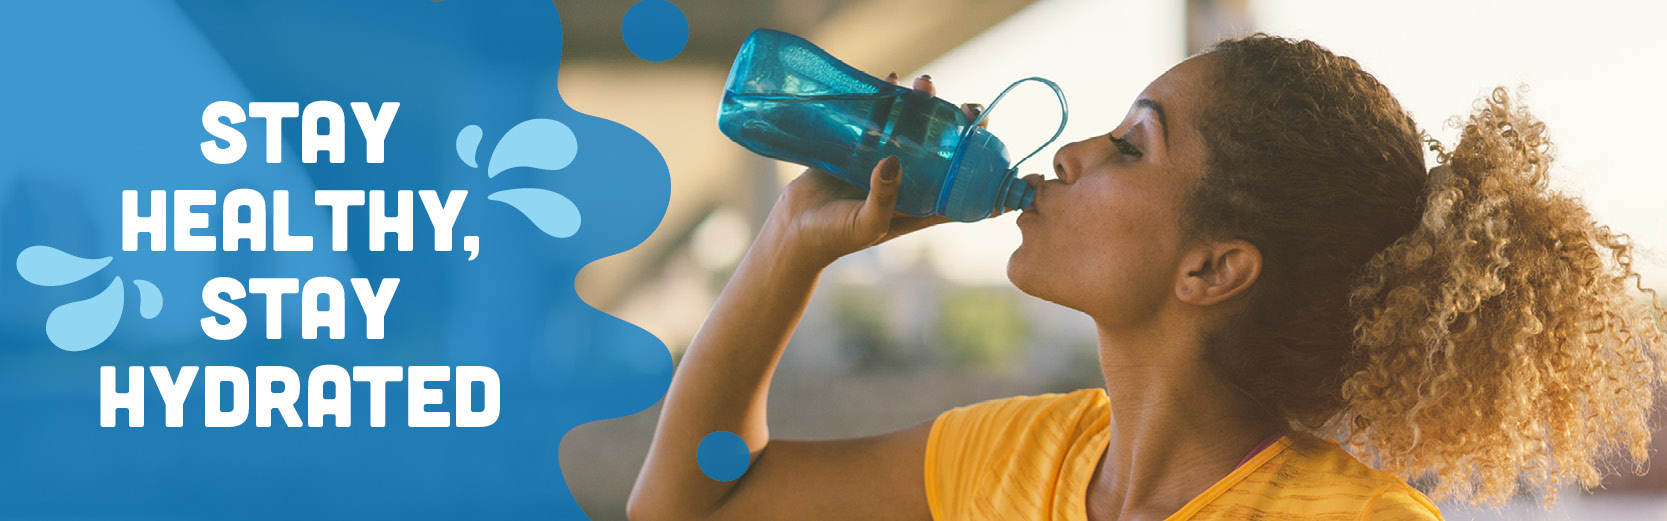 Stay hydrated during hot summers